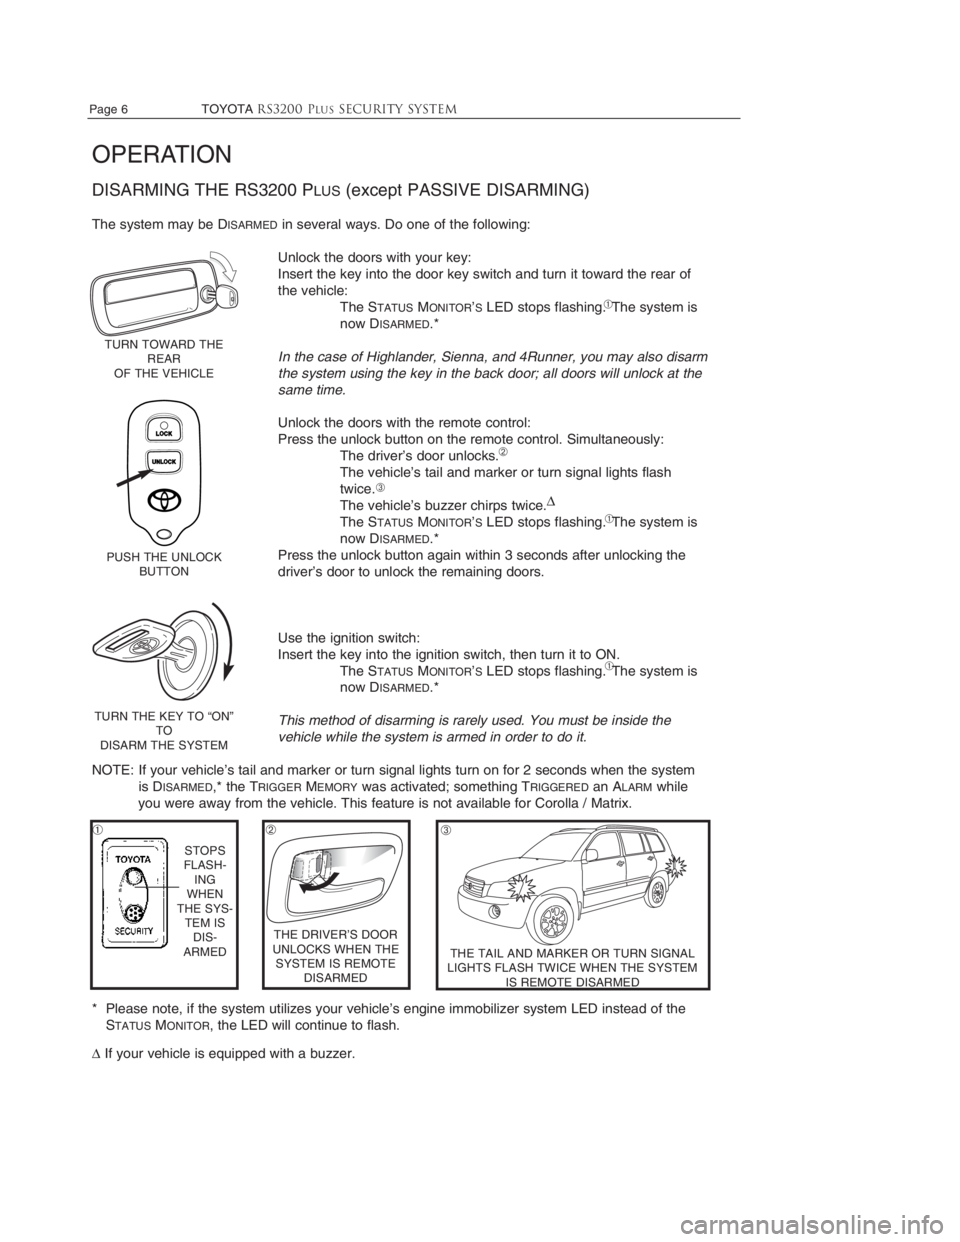 TOYOTA TACOMA 2003  Accessories, Audio & Navigation (in English) Page 6                    TOYOTARS3200 PLUSSecurity system
OPERATION
DISARMING THE RS3200 PLUS(except PASSIVE DISARMING)
The system may be DISARMEDin several ways. Do one of the following: 
Unlock the